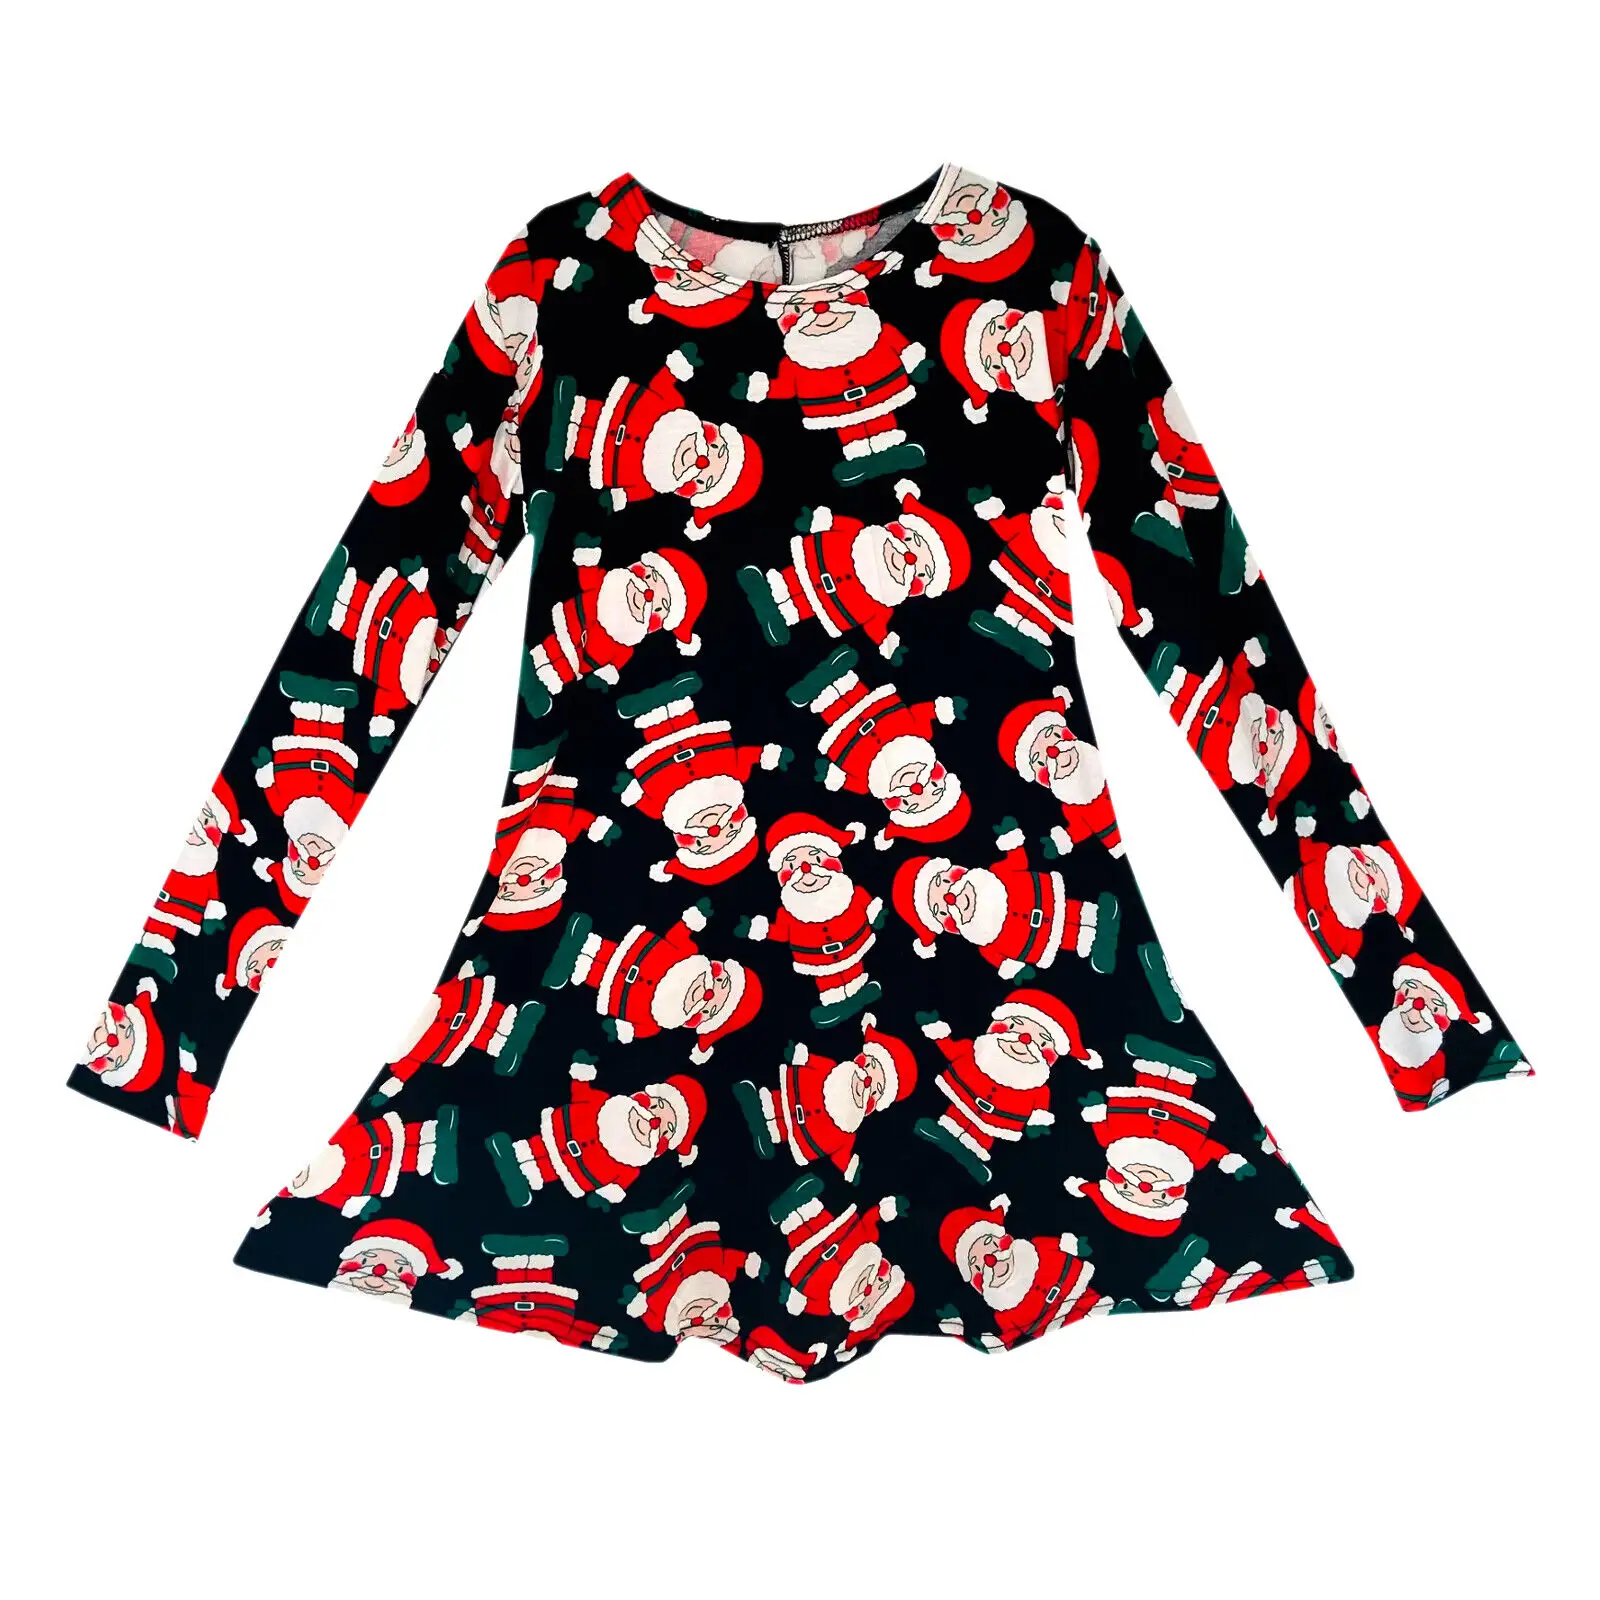 Long Sleeve Round Neck Dress Dropshipping Christmas Dresses For Girl Clothes Customize Design Party Dress In Christmas Style